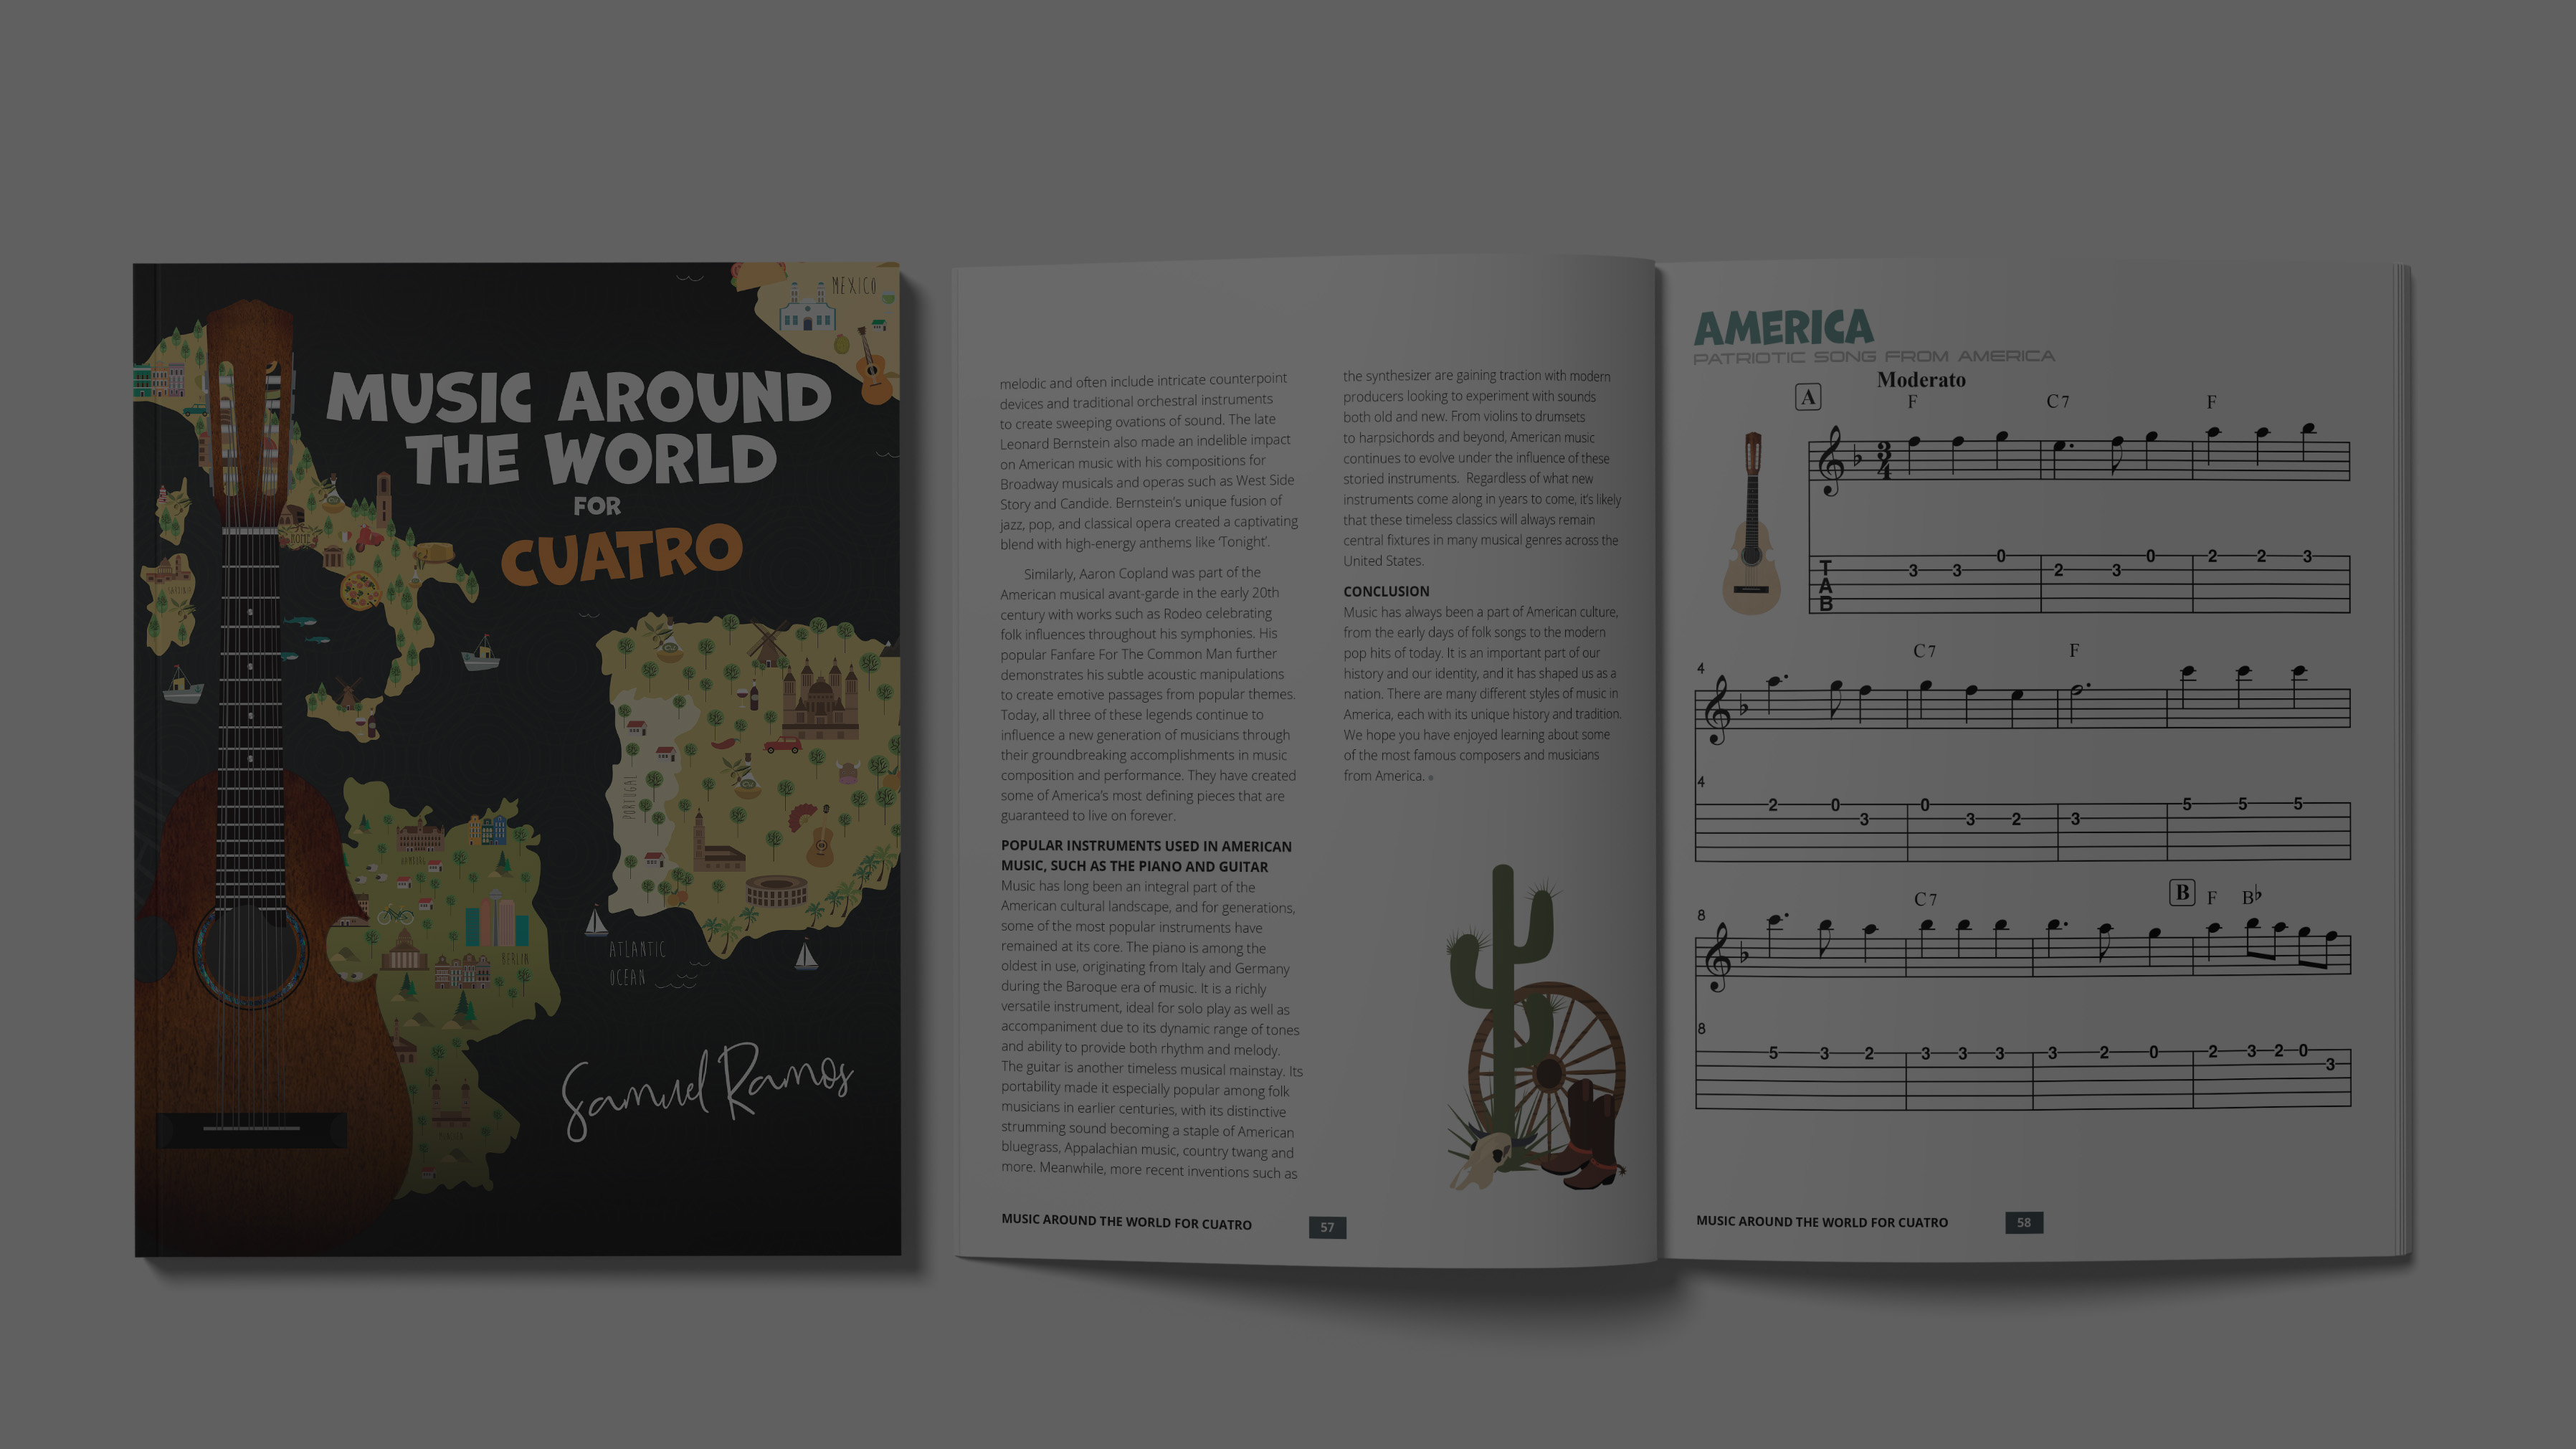 Music Around the World for Cuatro: A Journey Around the World, Learning Classic Songs from Each Destination 